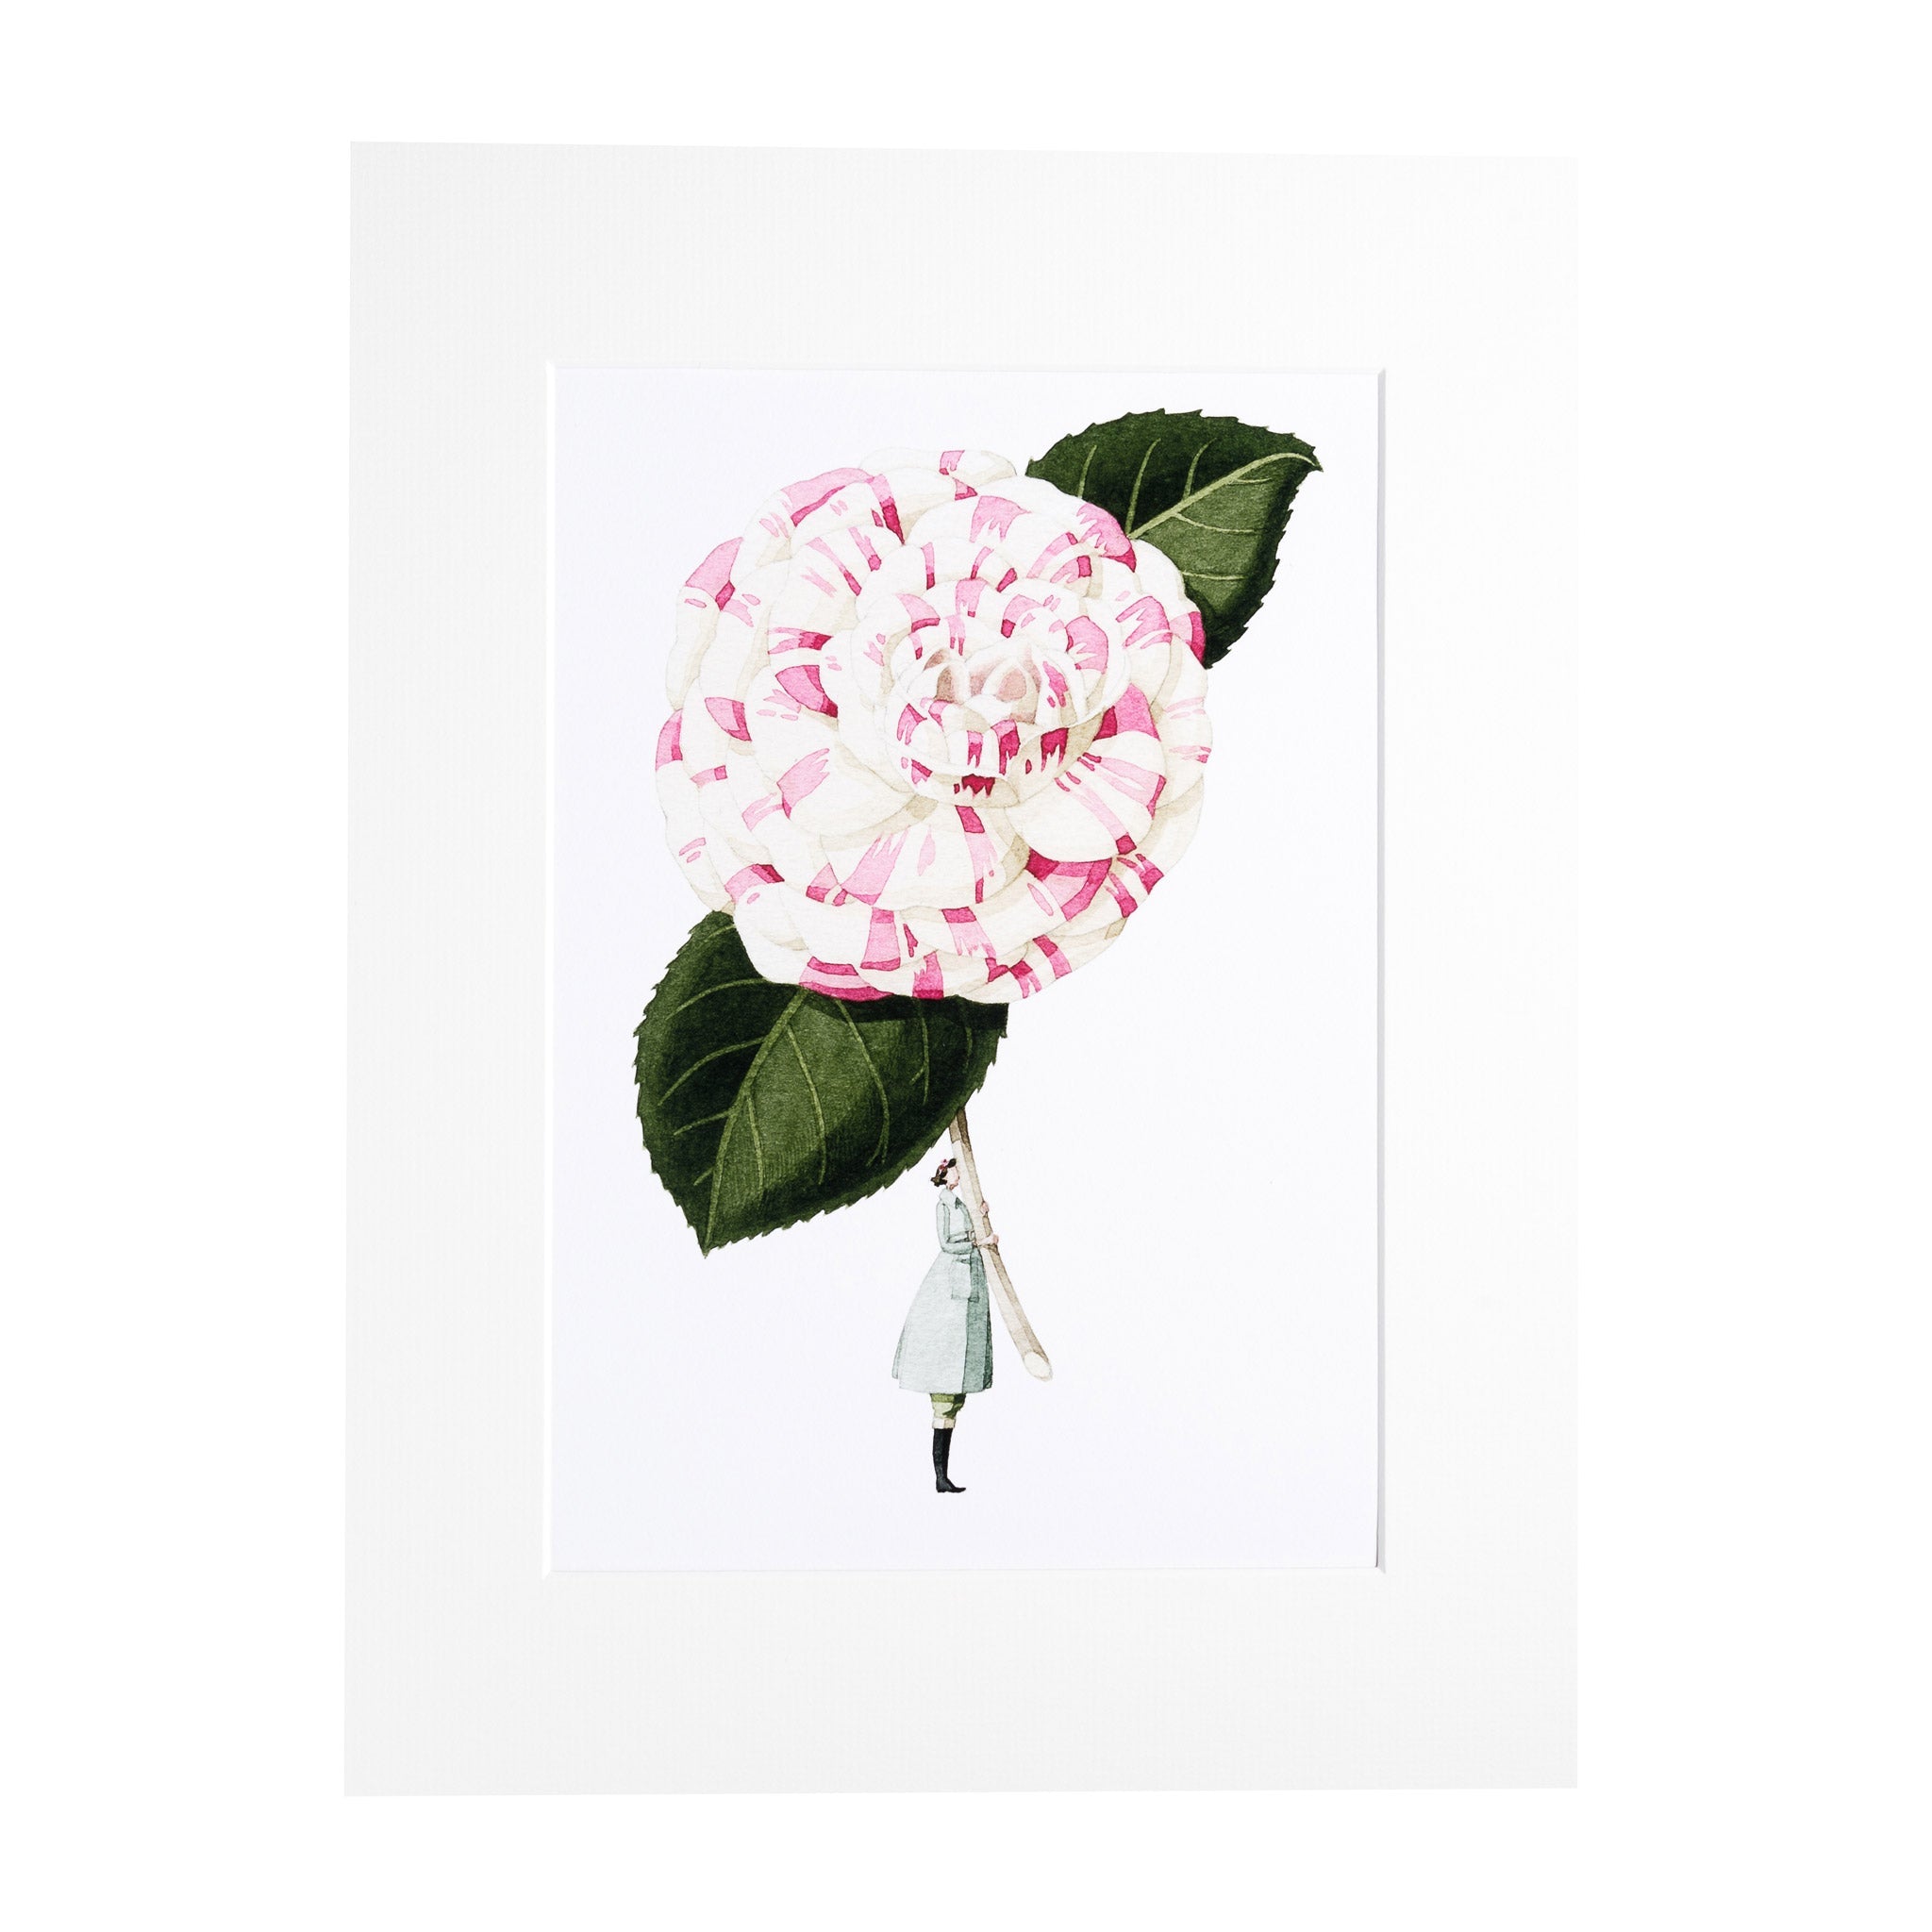 CAMELLIA "IN BLOOM" MOUNTED A4 PRINT